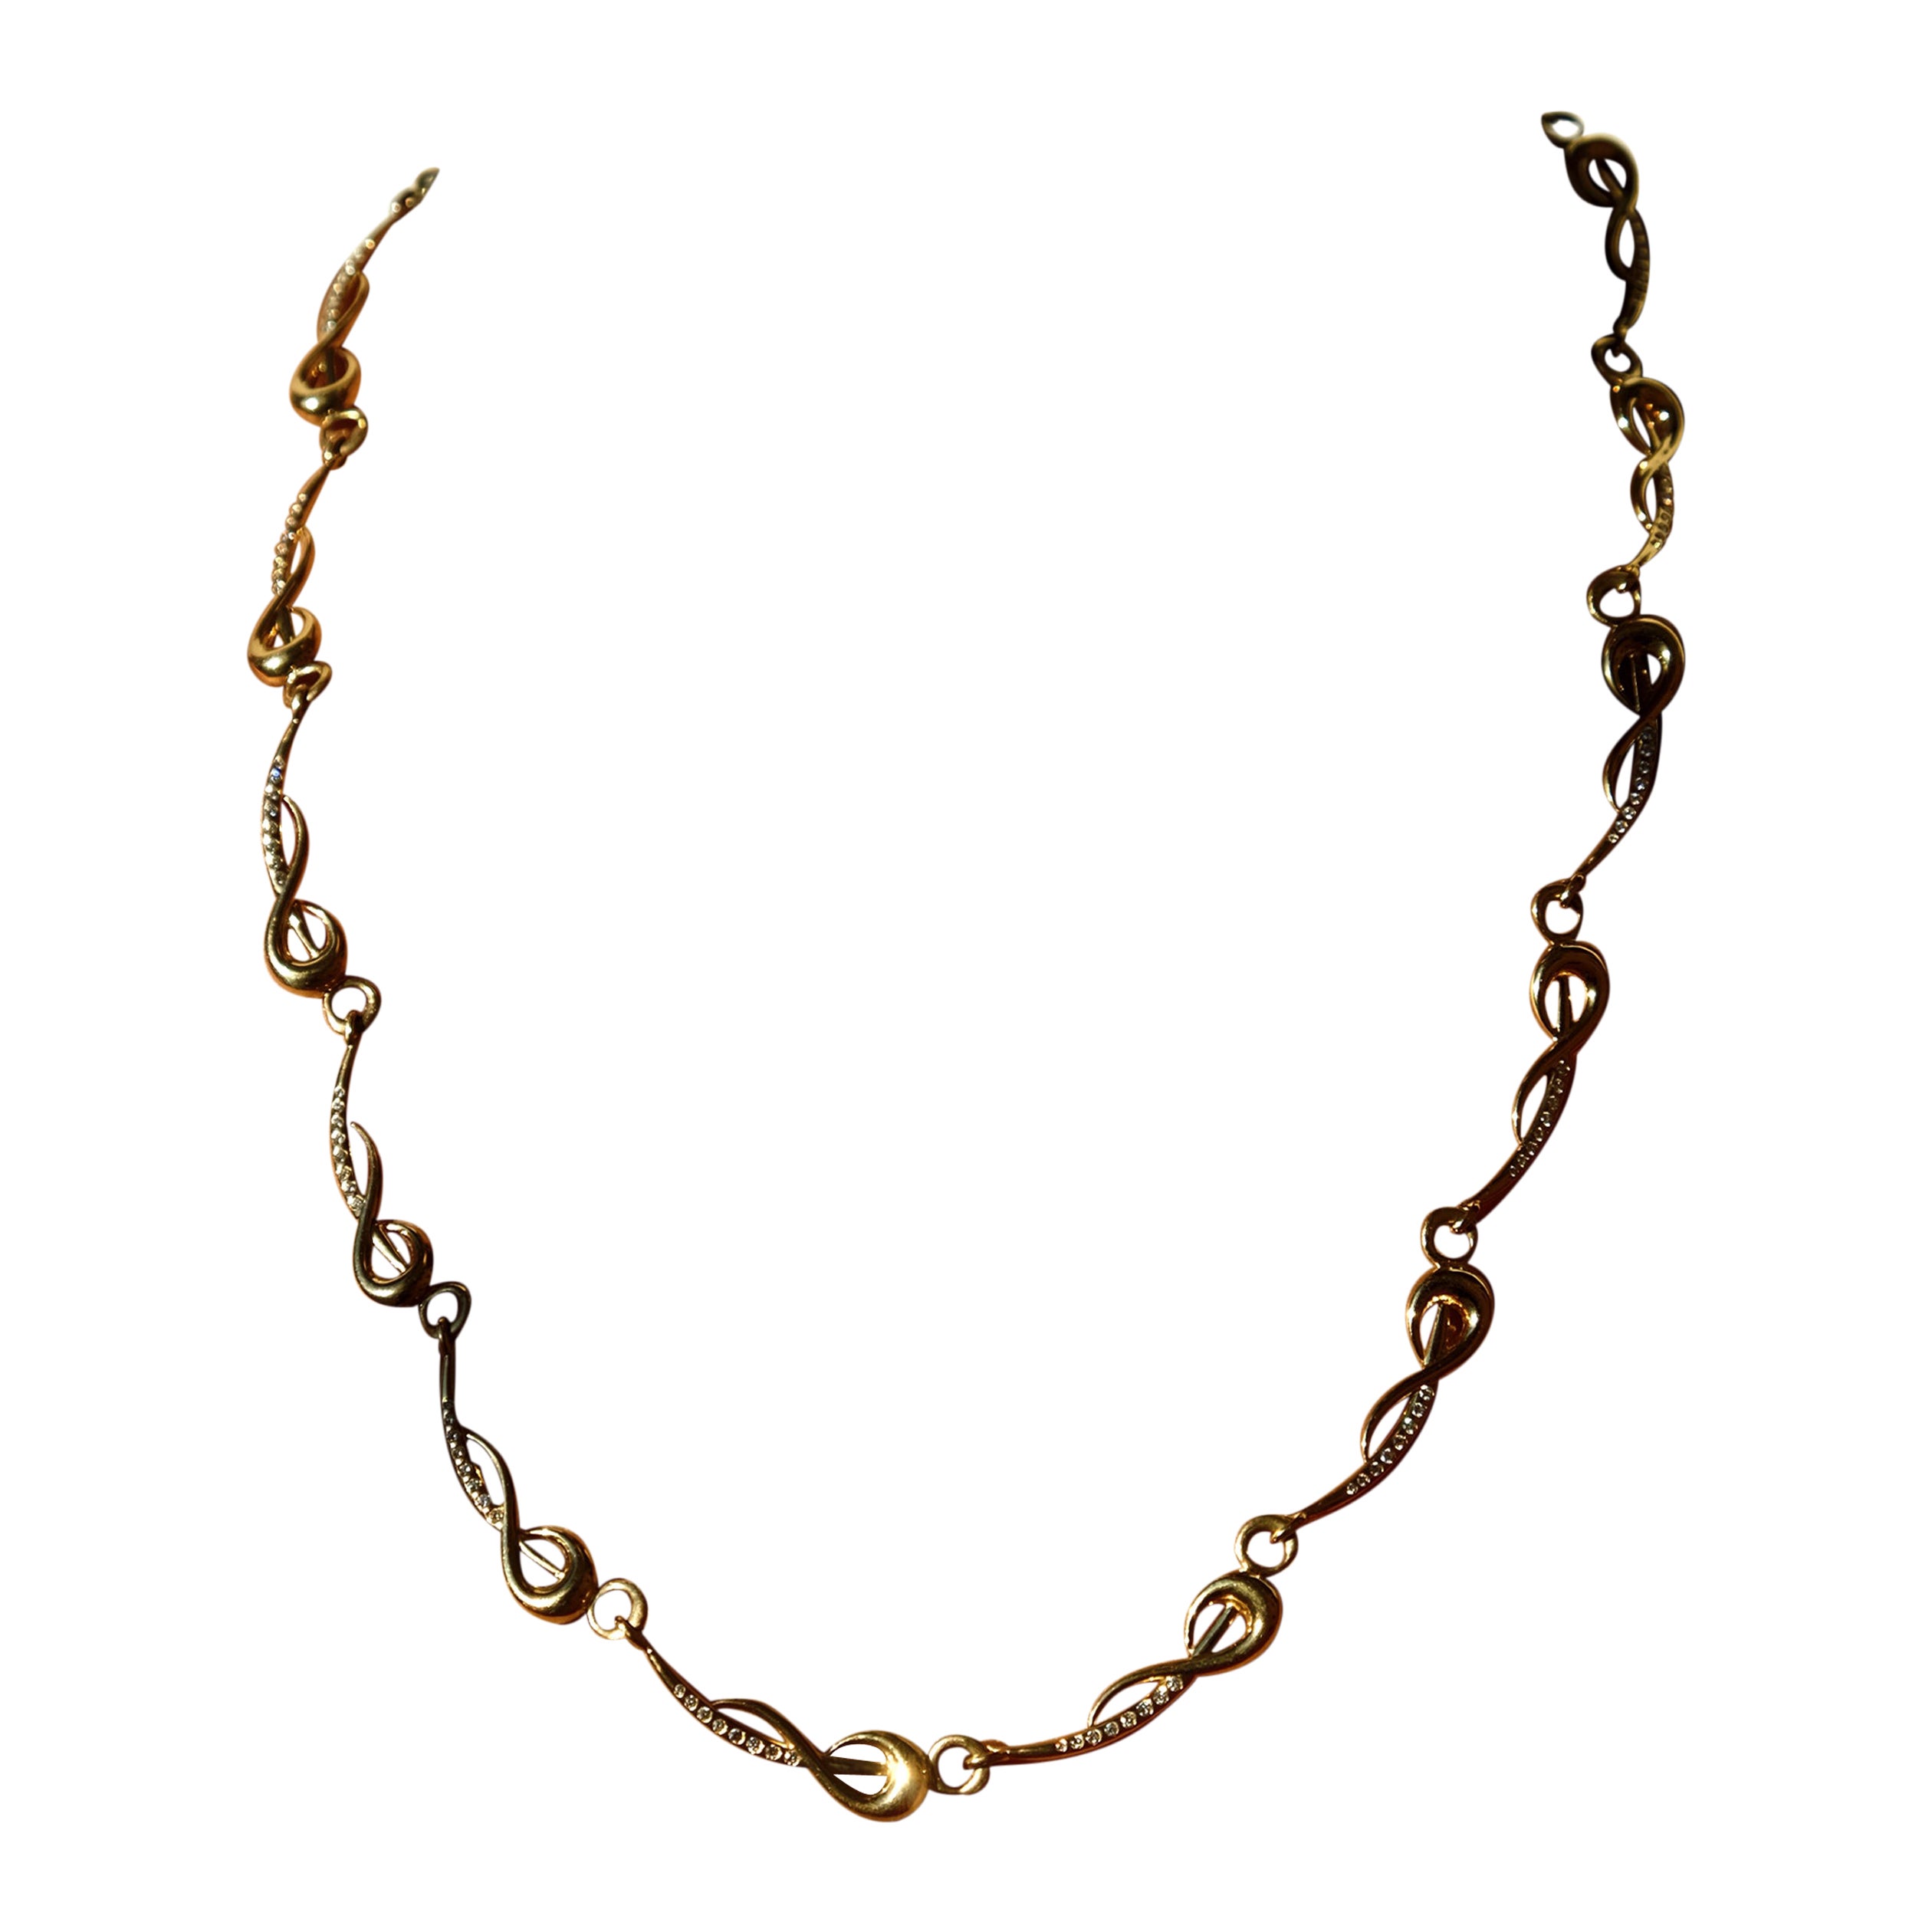 Touissant Link Chain in 18k Gold with Diamonds